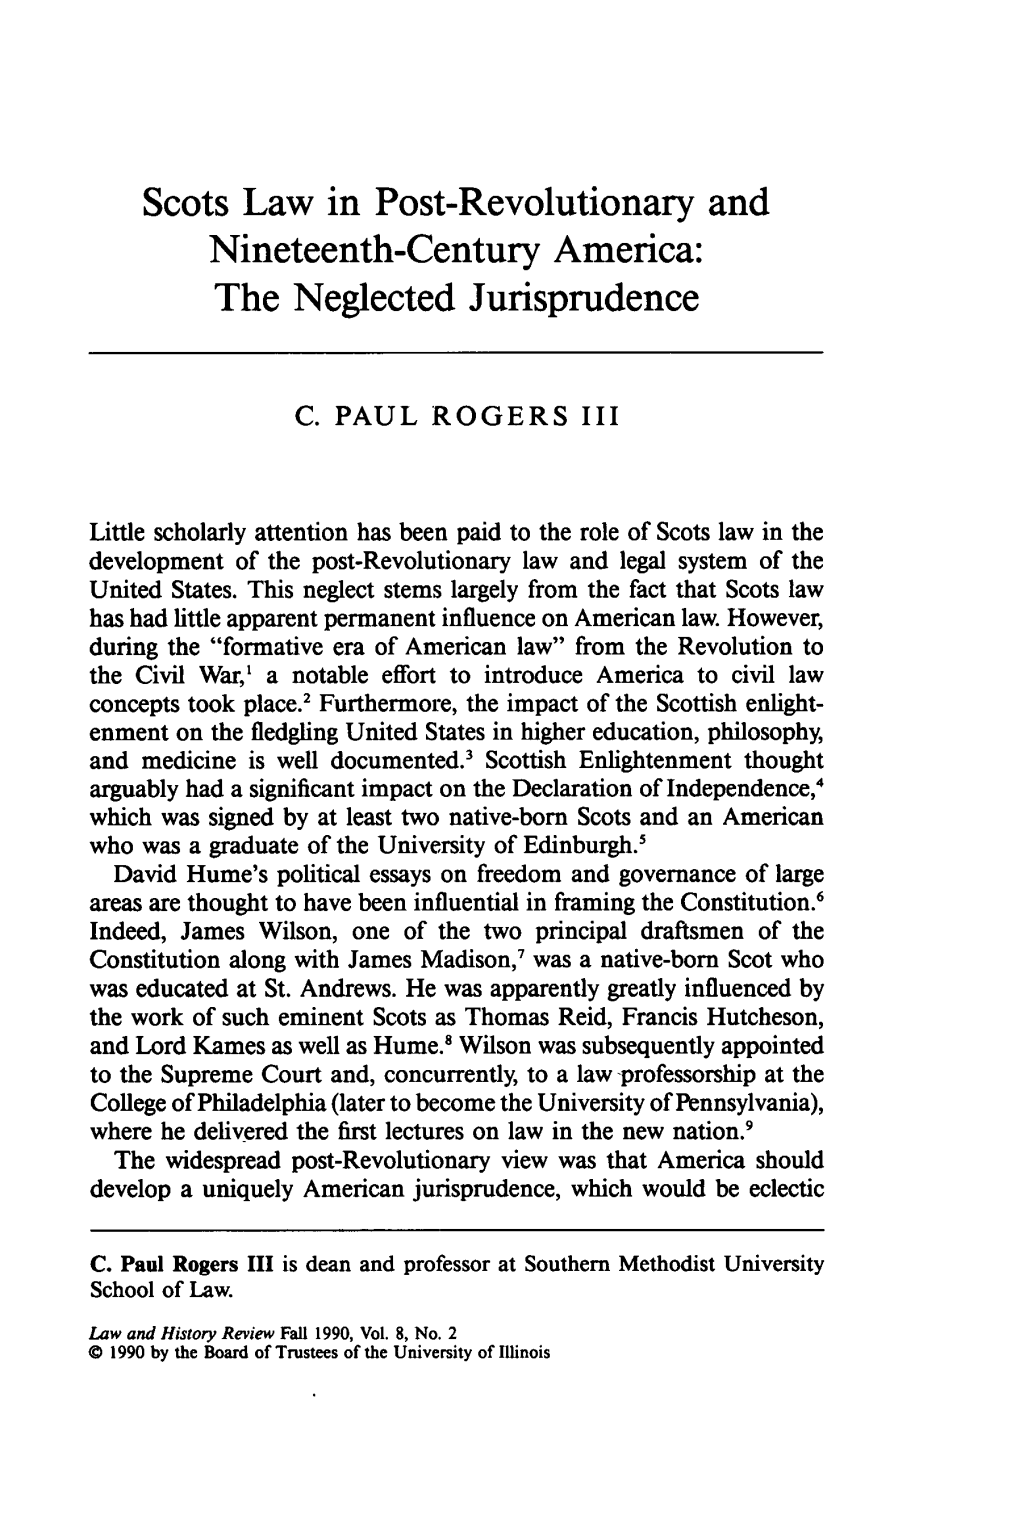 Scots Law in Post-Revolutionary and Nineteenth-Century America: the Neglected Jurisprudence